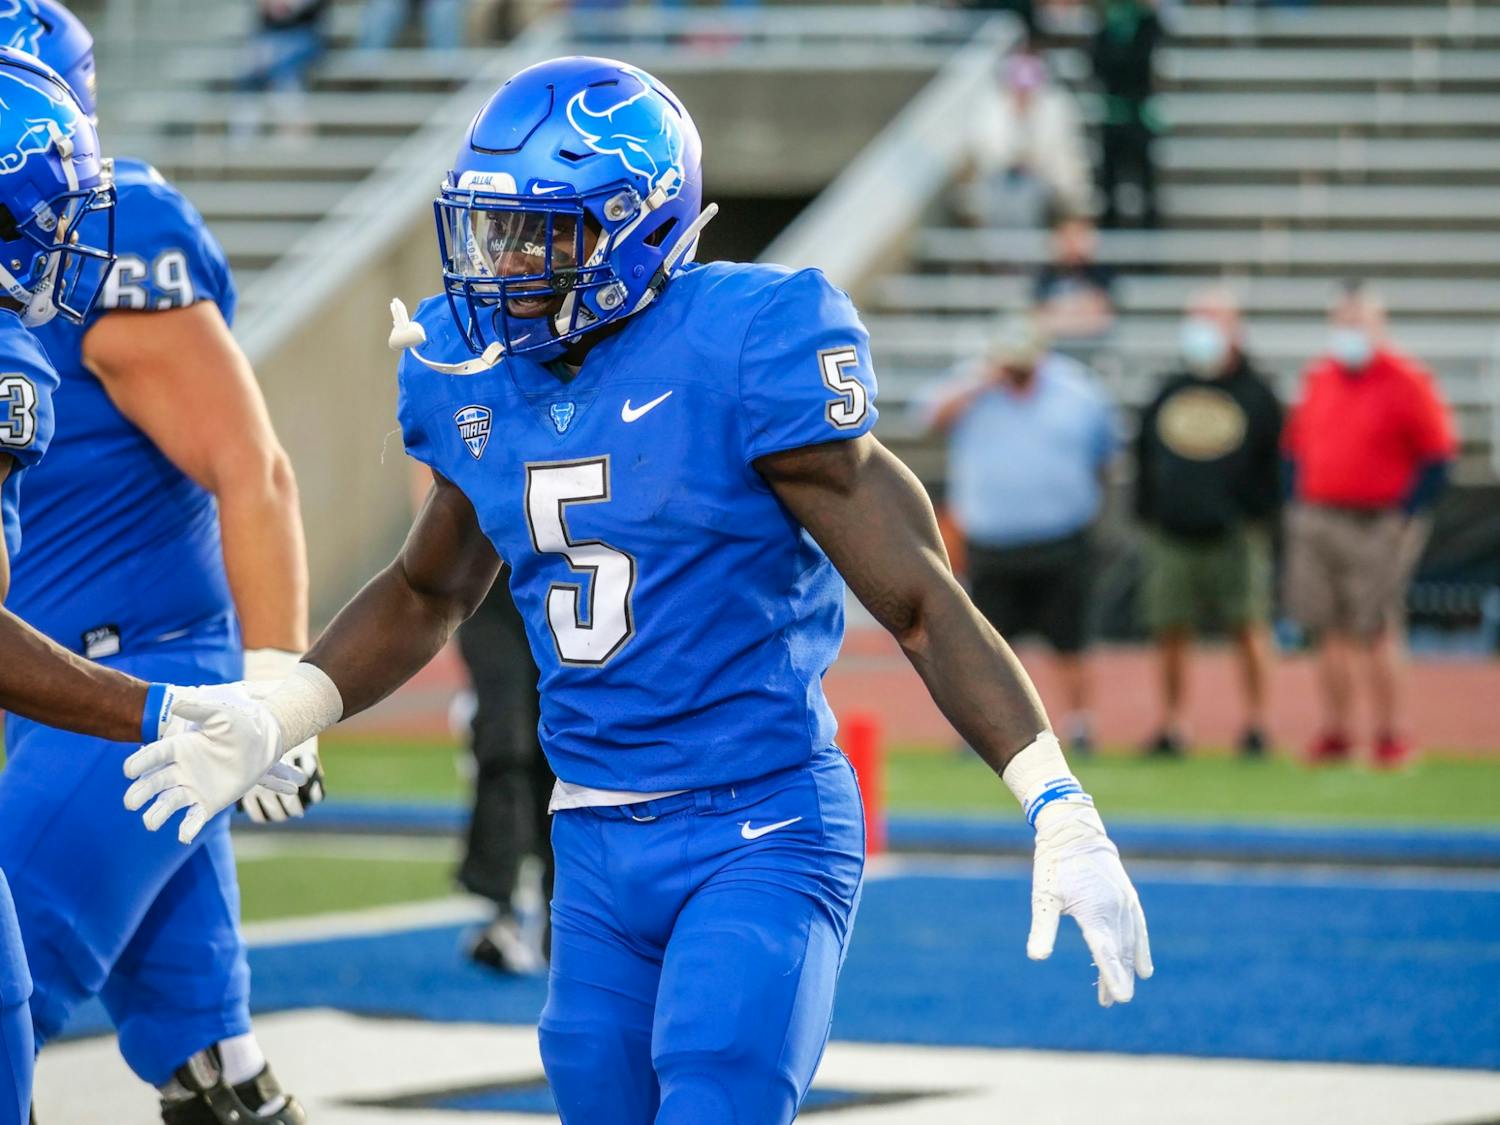 10 PLAYERS, 10 STORIES ABOUT UB FOOTBALL THIS SEASON